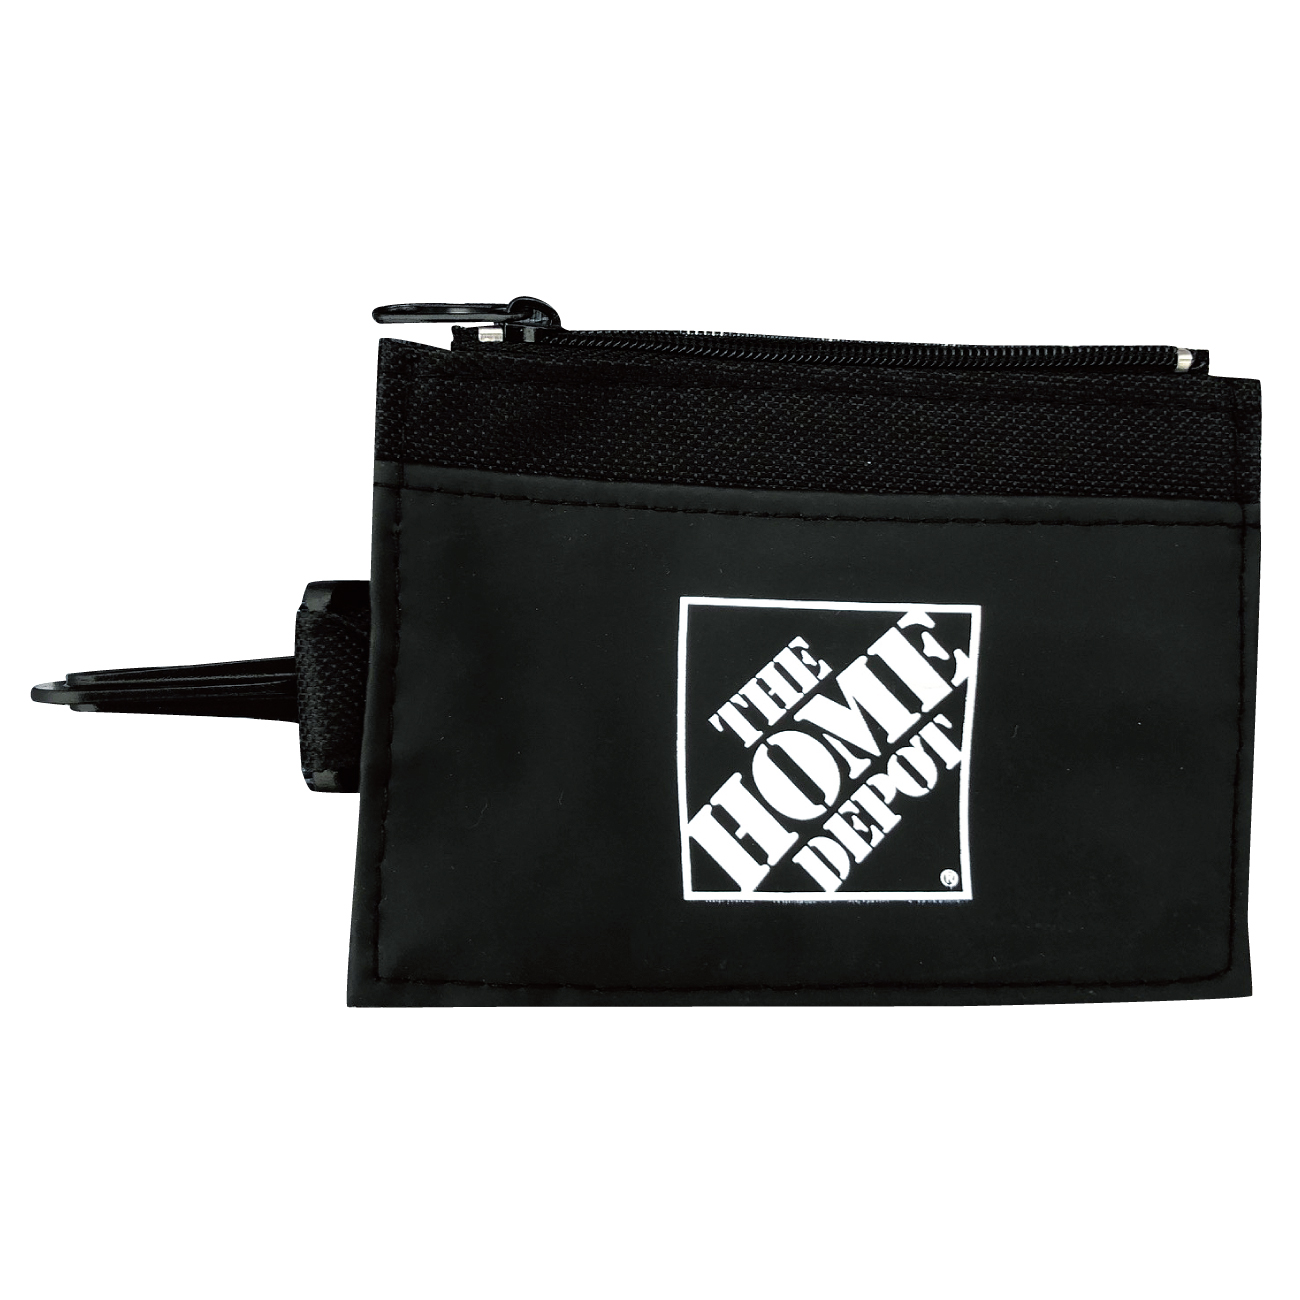 HOMEDEPOT ID HOLDER & COIN POUCH　ホームデポ　キーチェーン